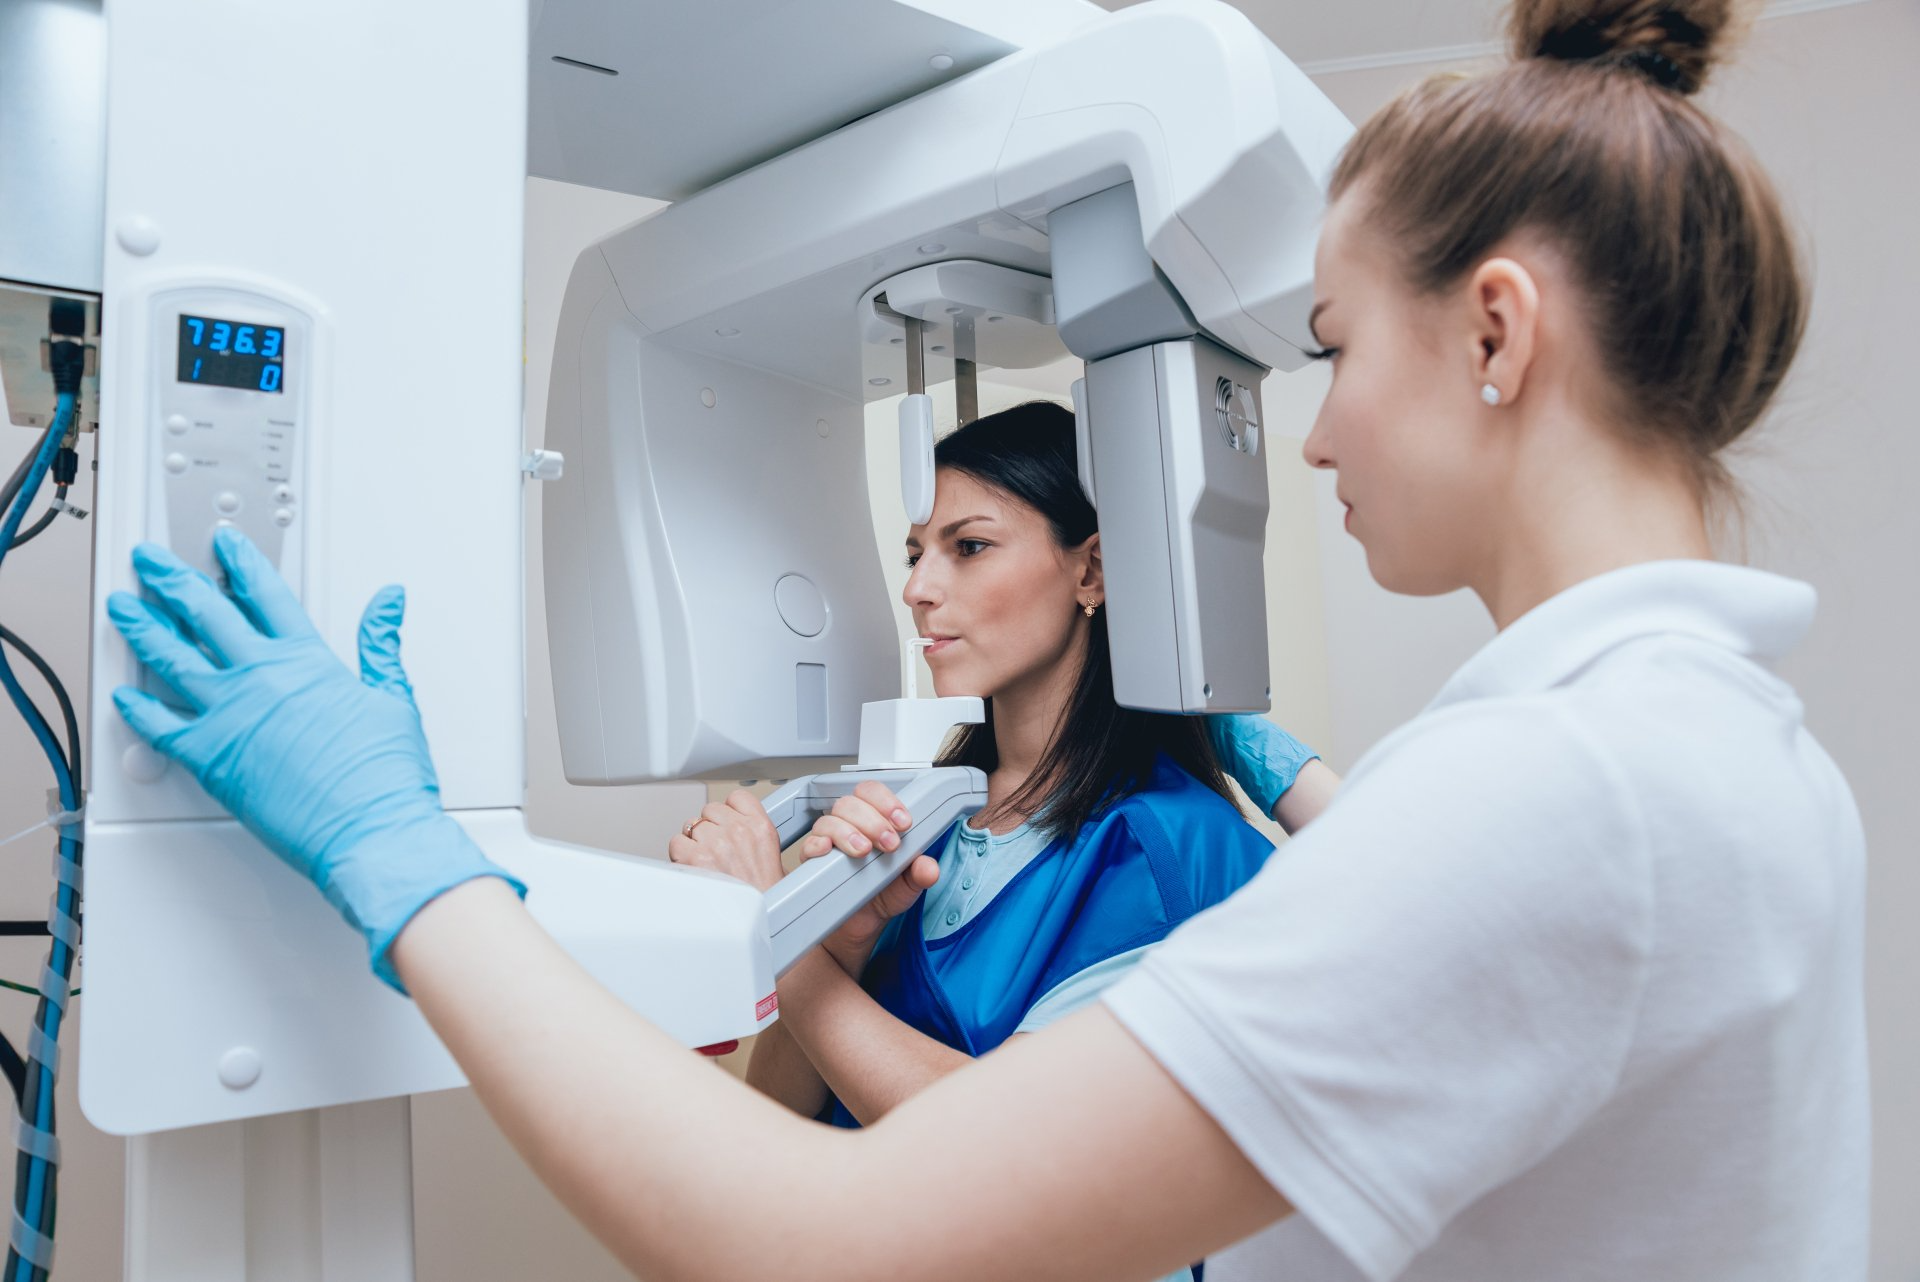 Dental technology | x ray machine | dentist near you | female patient getting an x ray | Affordable Family Dental | Best Family And Cosmetic Dentist In Chelsea, Massachusetts